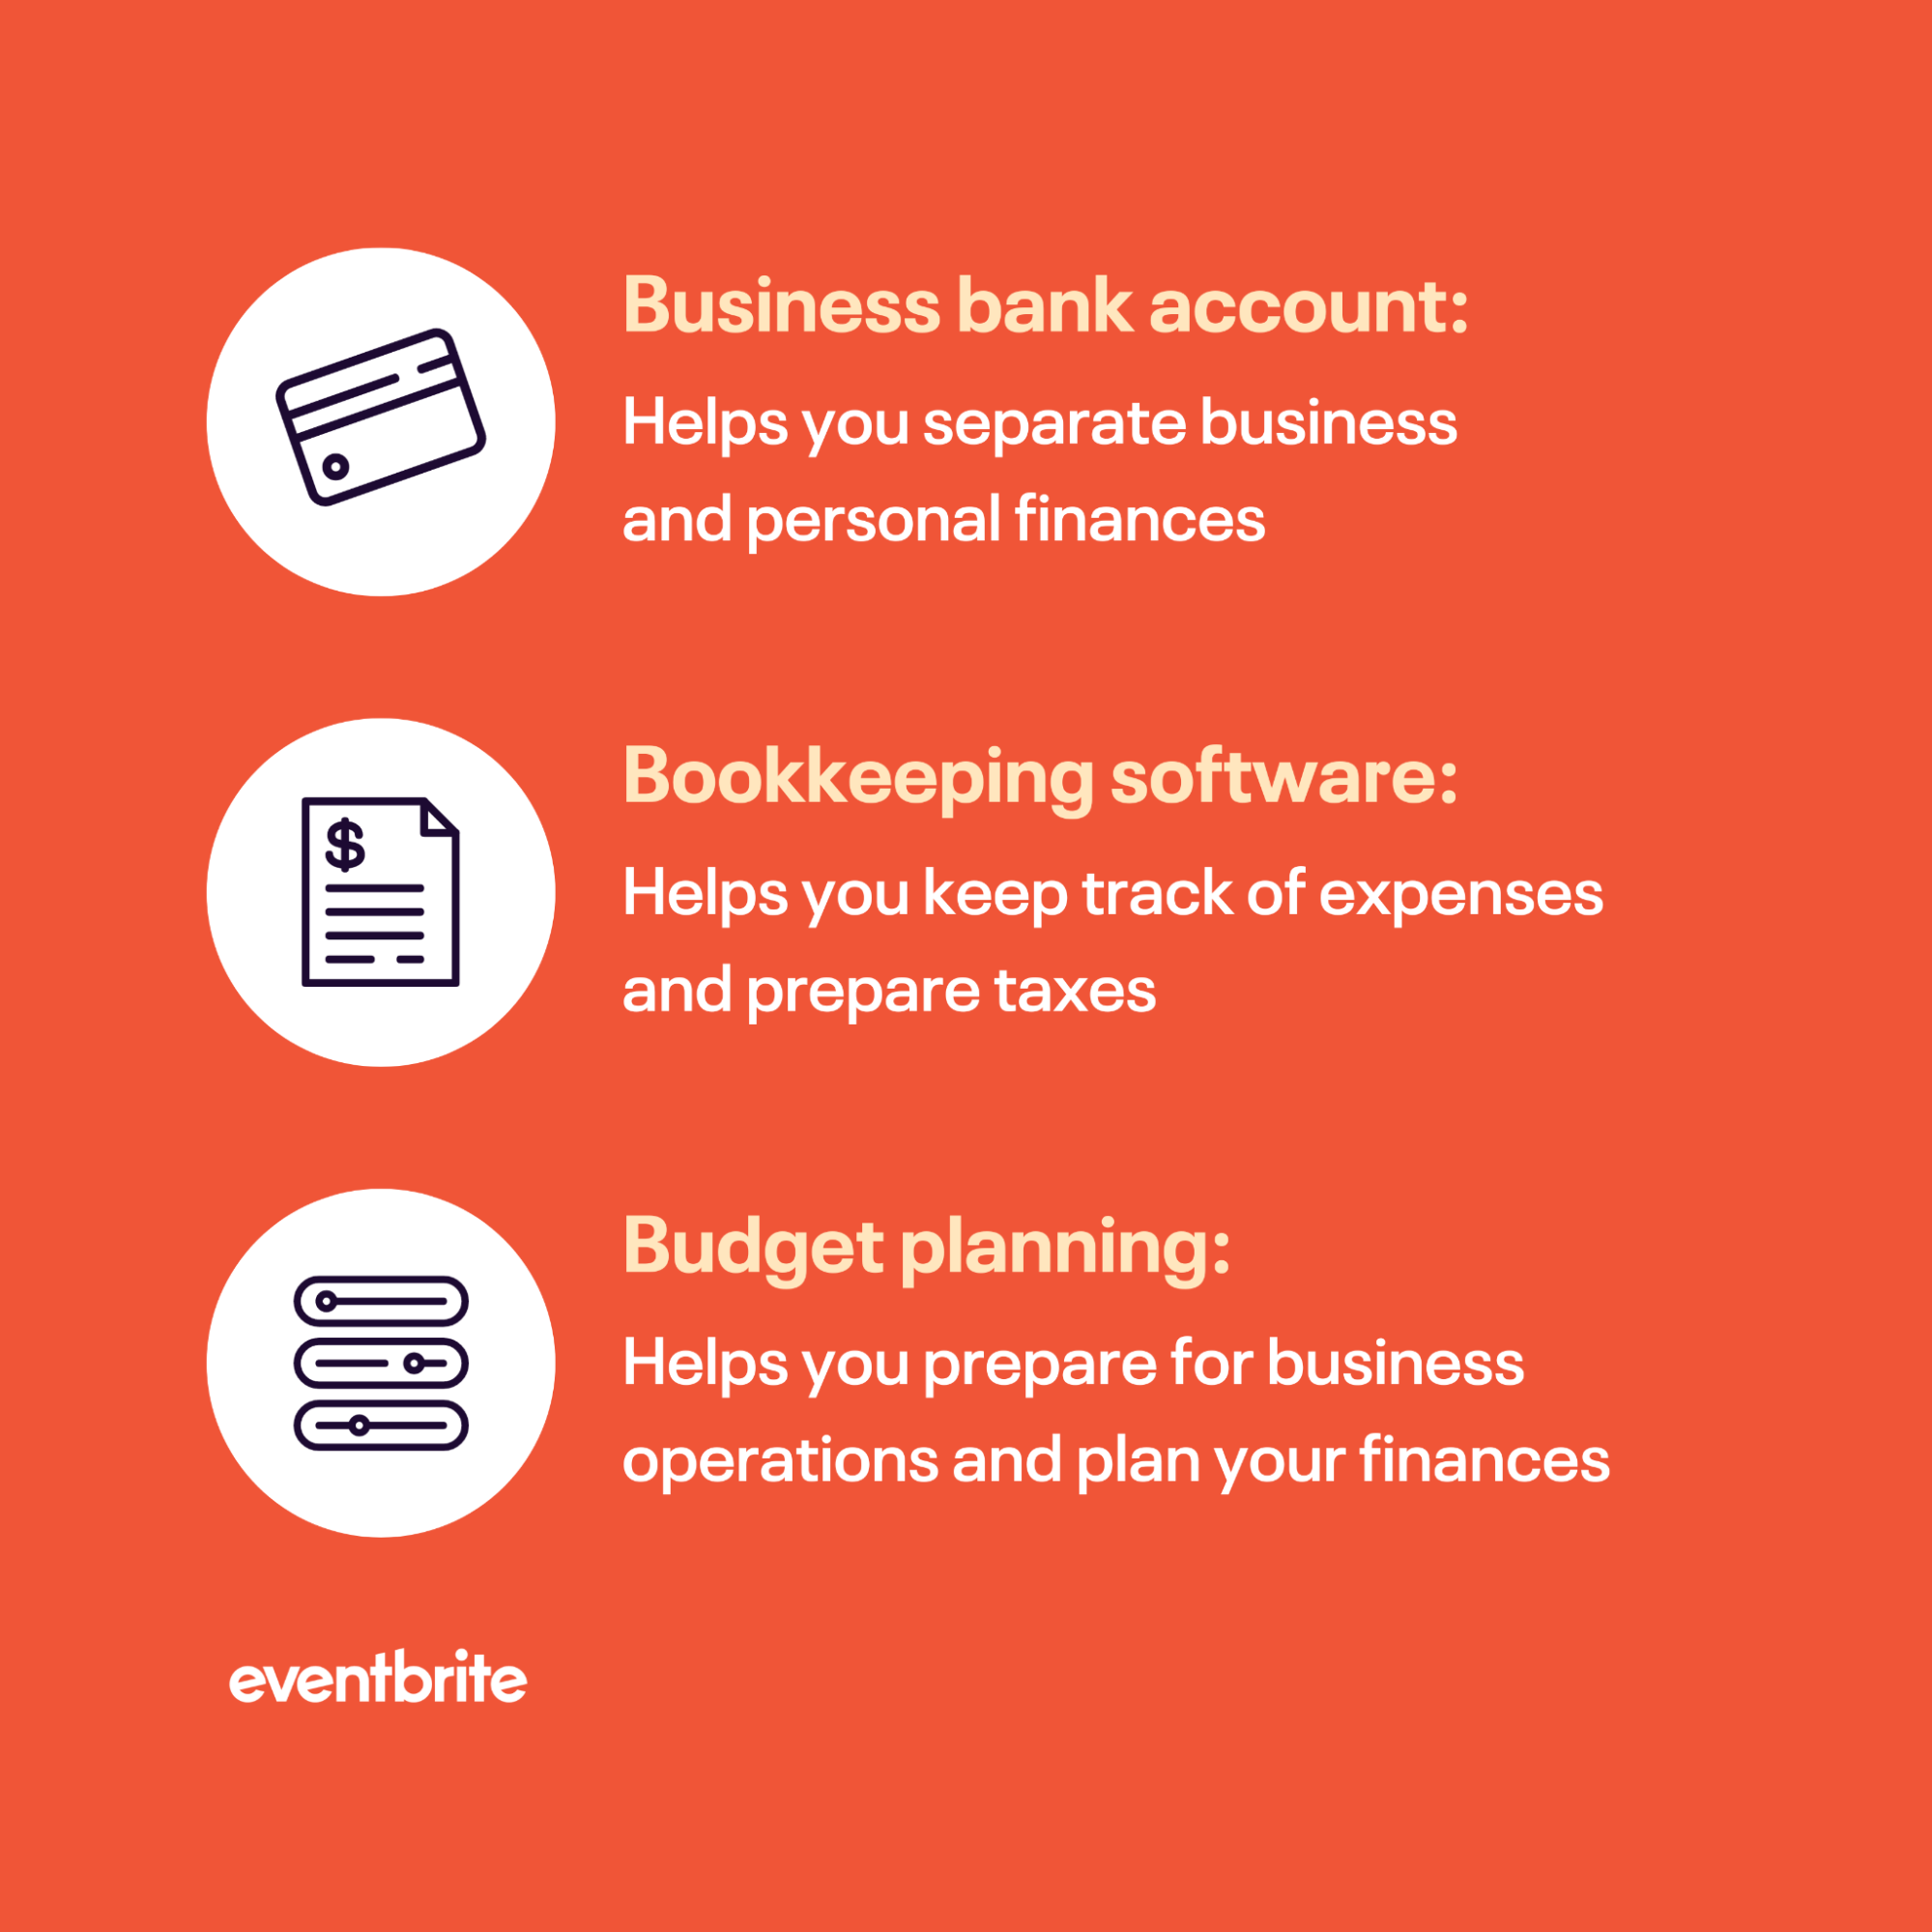 Bank account and bookkeeping tools